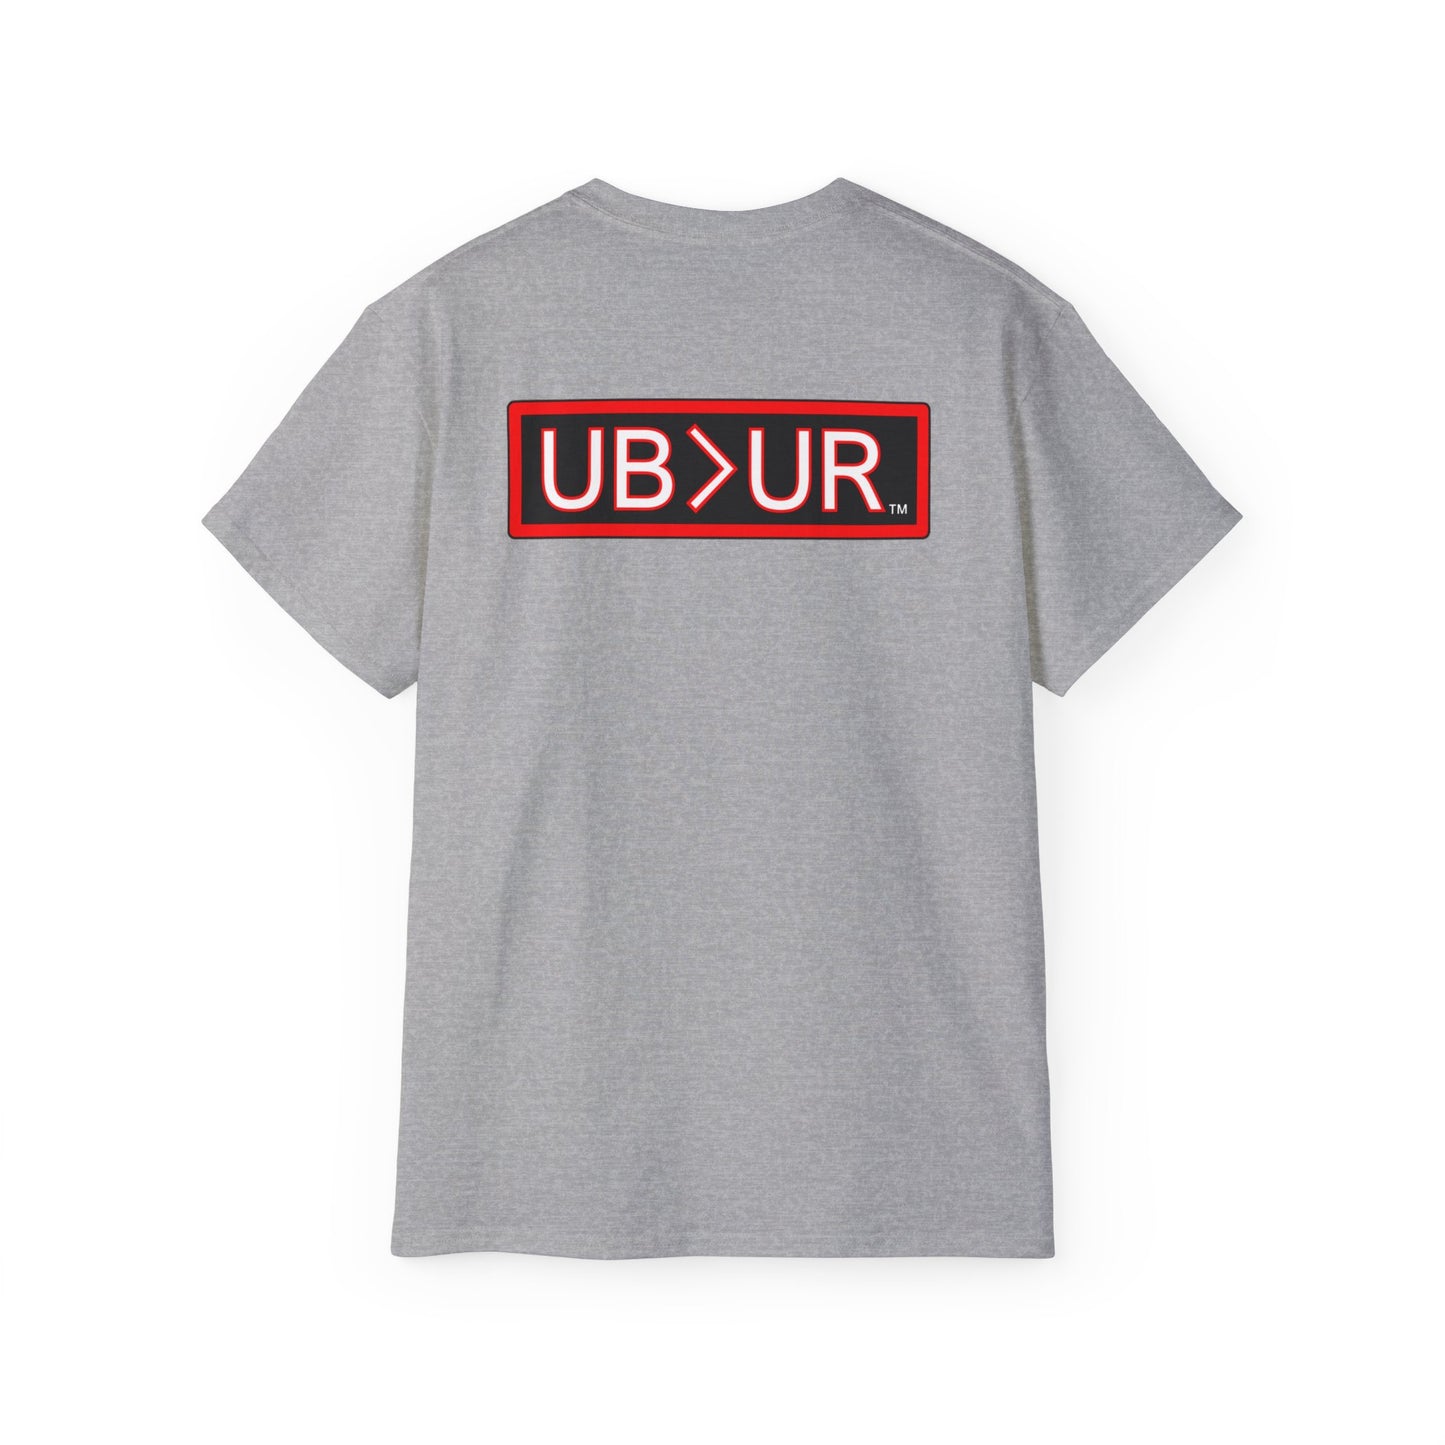 POWERFUL Unisex Ultra Cotton T-shirt with UB>UR in the back.